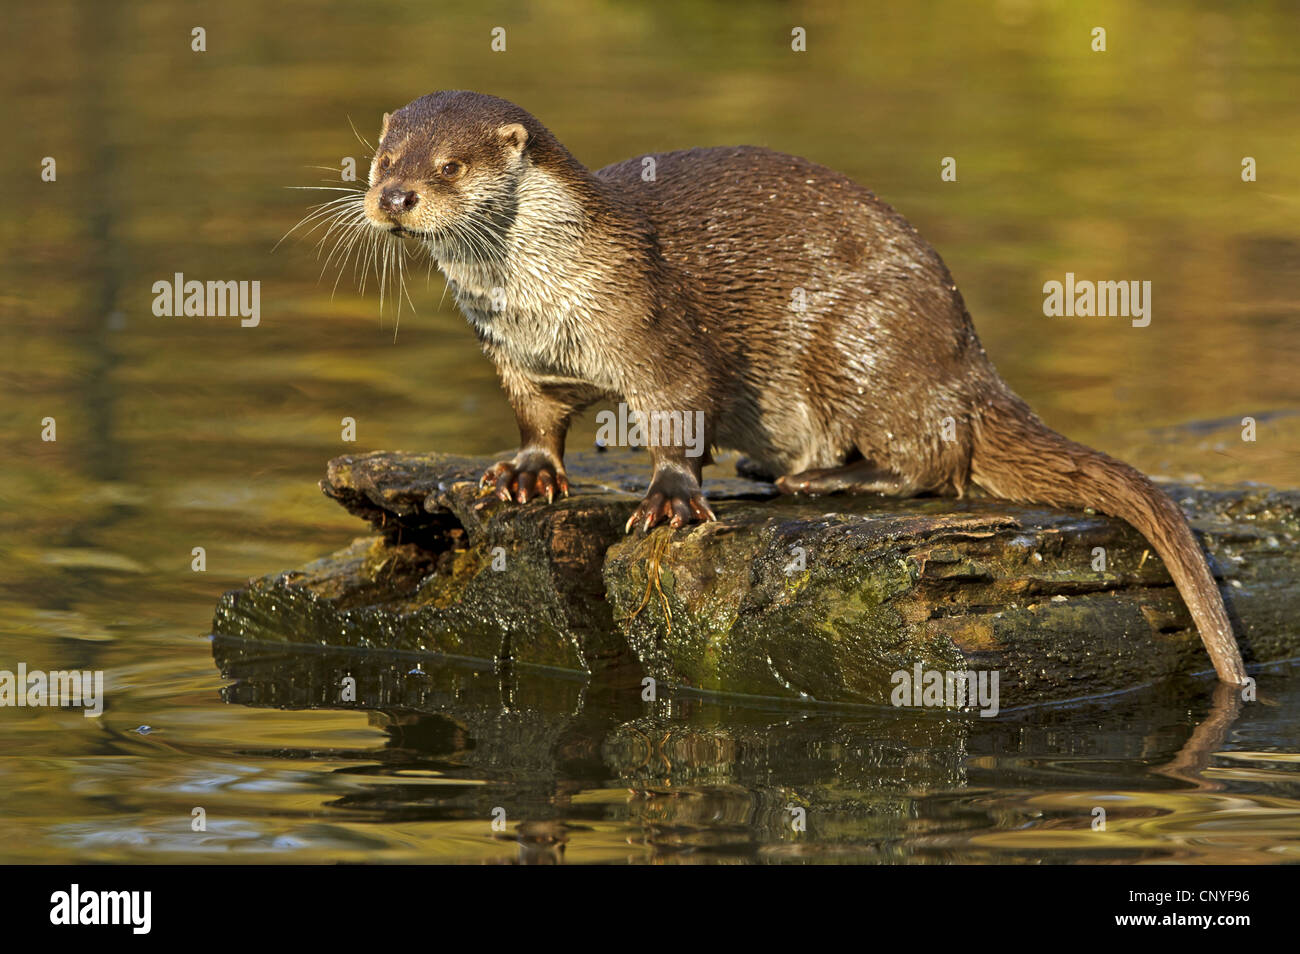 European river otter, European Otter, Eurasian Otter (Lutra lutra), sitting on dead wood in the water, Germany, Lower Saxony Stock Photo